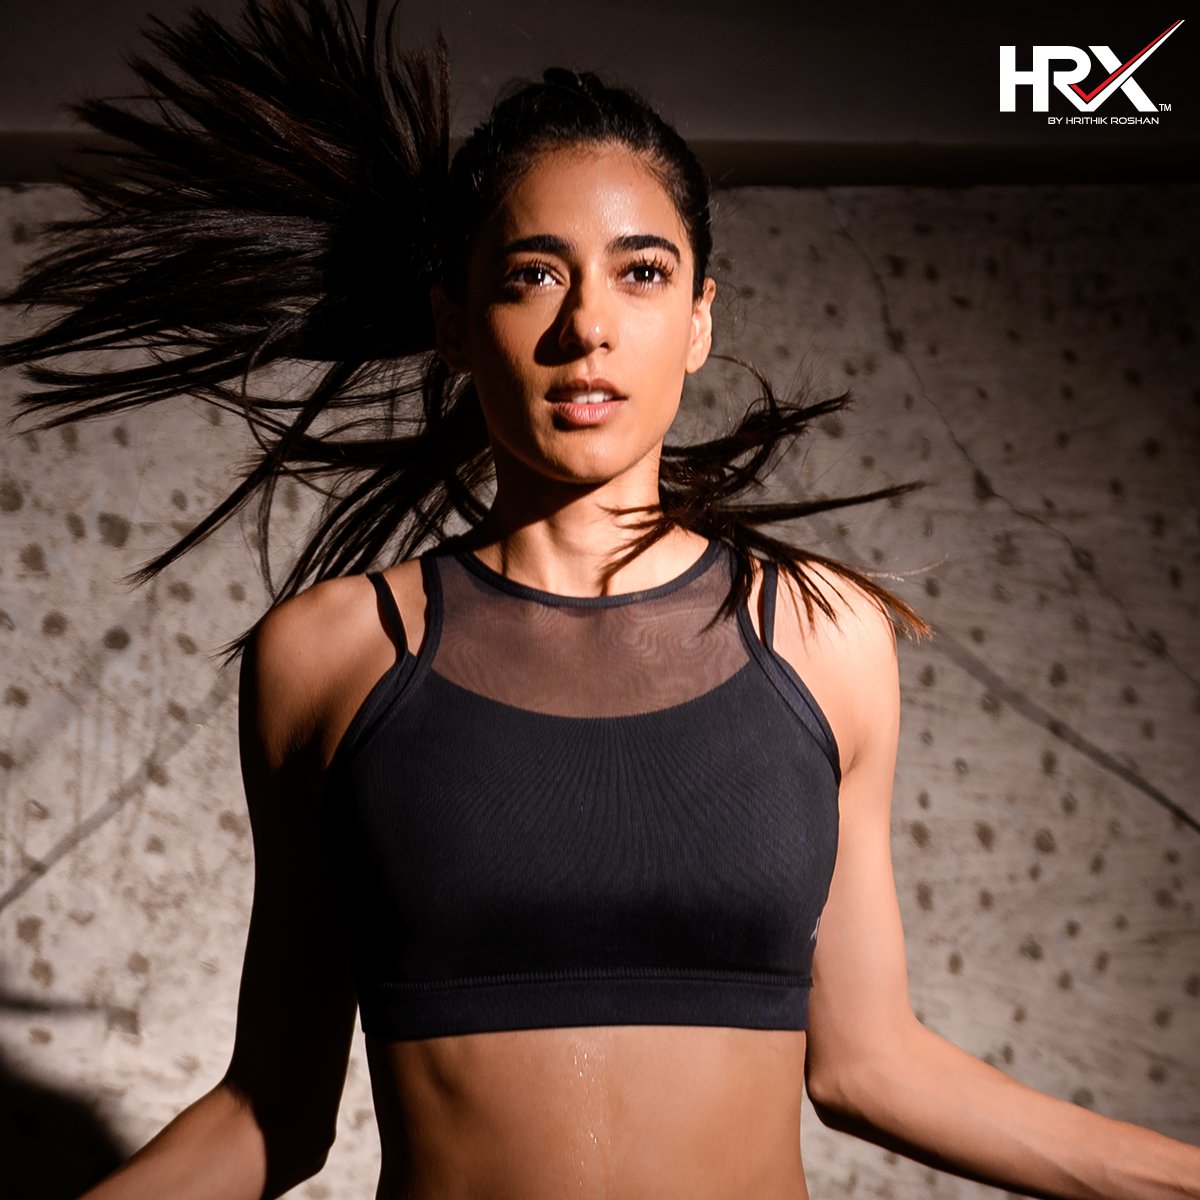 HRX on X: Skipping into winter like Diva Dhawan🤸🏽 Our latest #GirlsOfHRX  AW 18 collection is now live. #KeepGoing the way she does, shop the  collection now at   / X